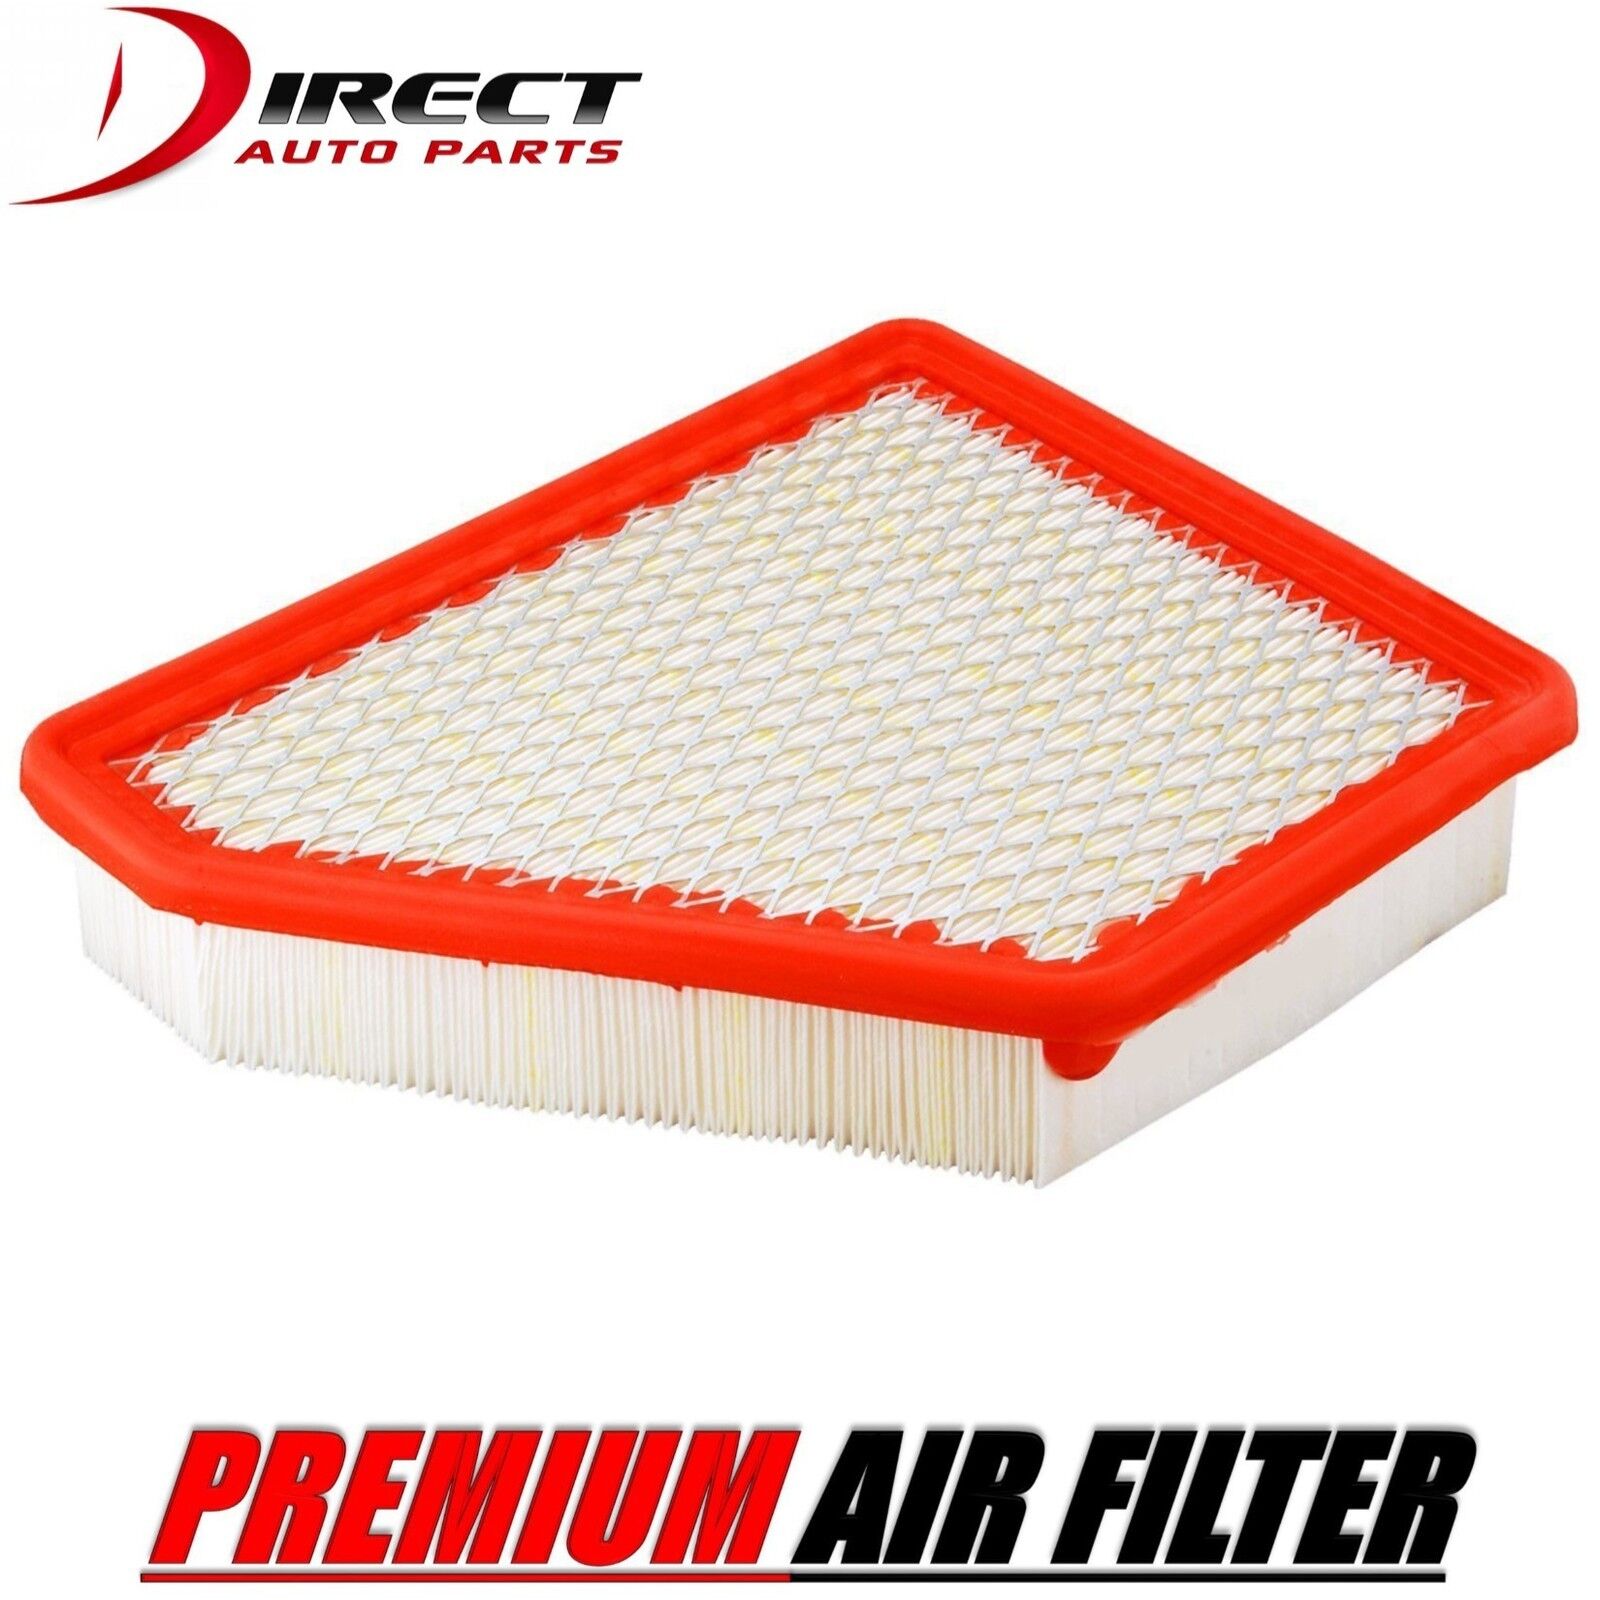 CHEVROLET AIR FILTER FOR CHEVROLET EQUINOX 2.4L ENGINE 2016 - 2010